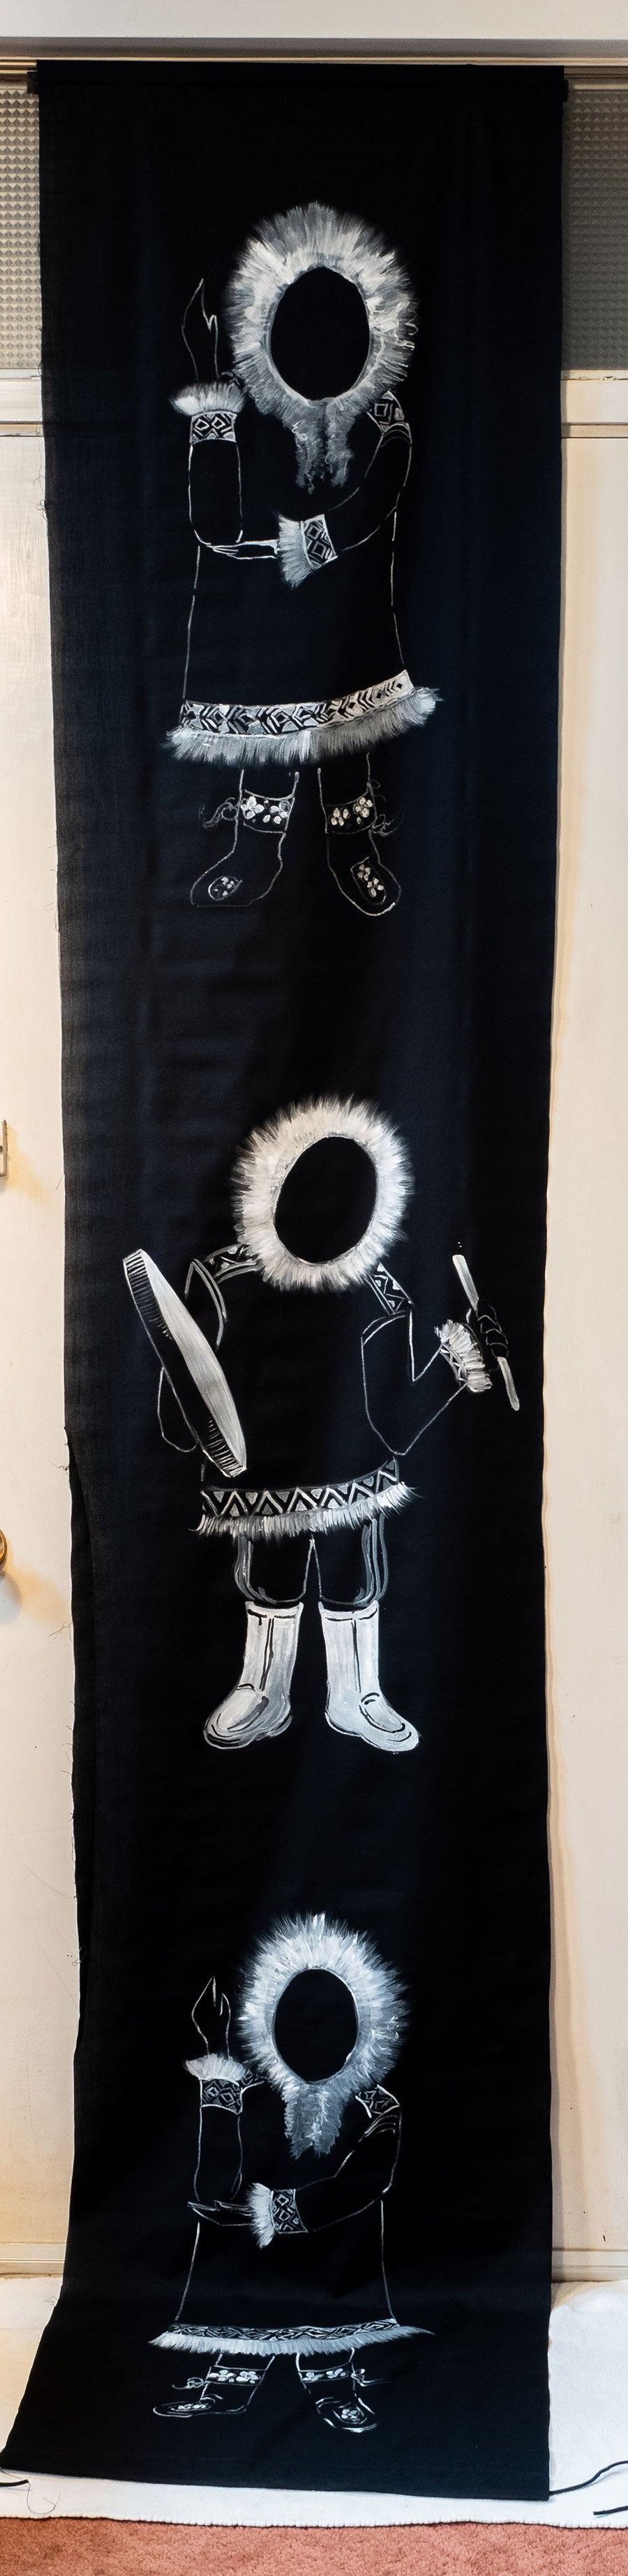 Inuit dancers in black and white on a tall banner.